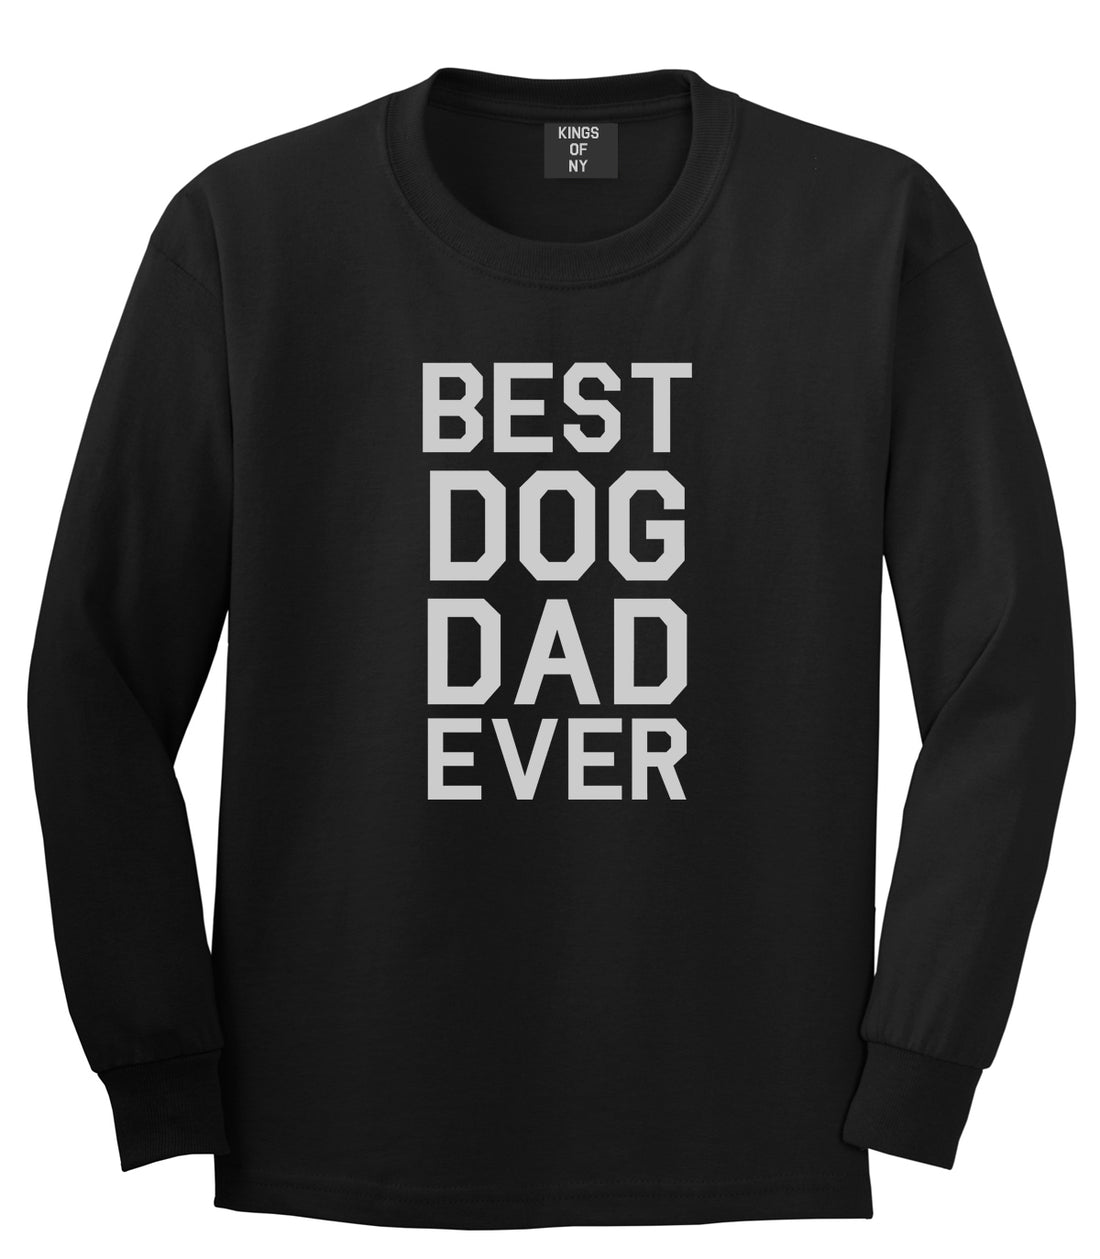 Best Dog Dad Ever Mens Black Long Sleeve T-Shirt by Kings Of NY